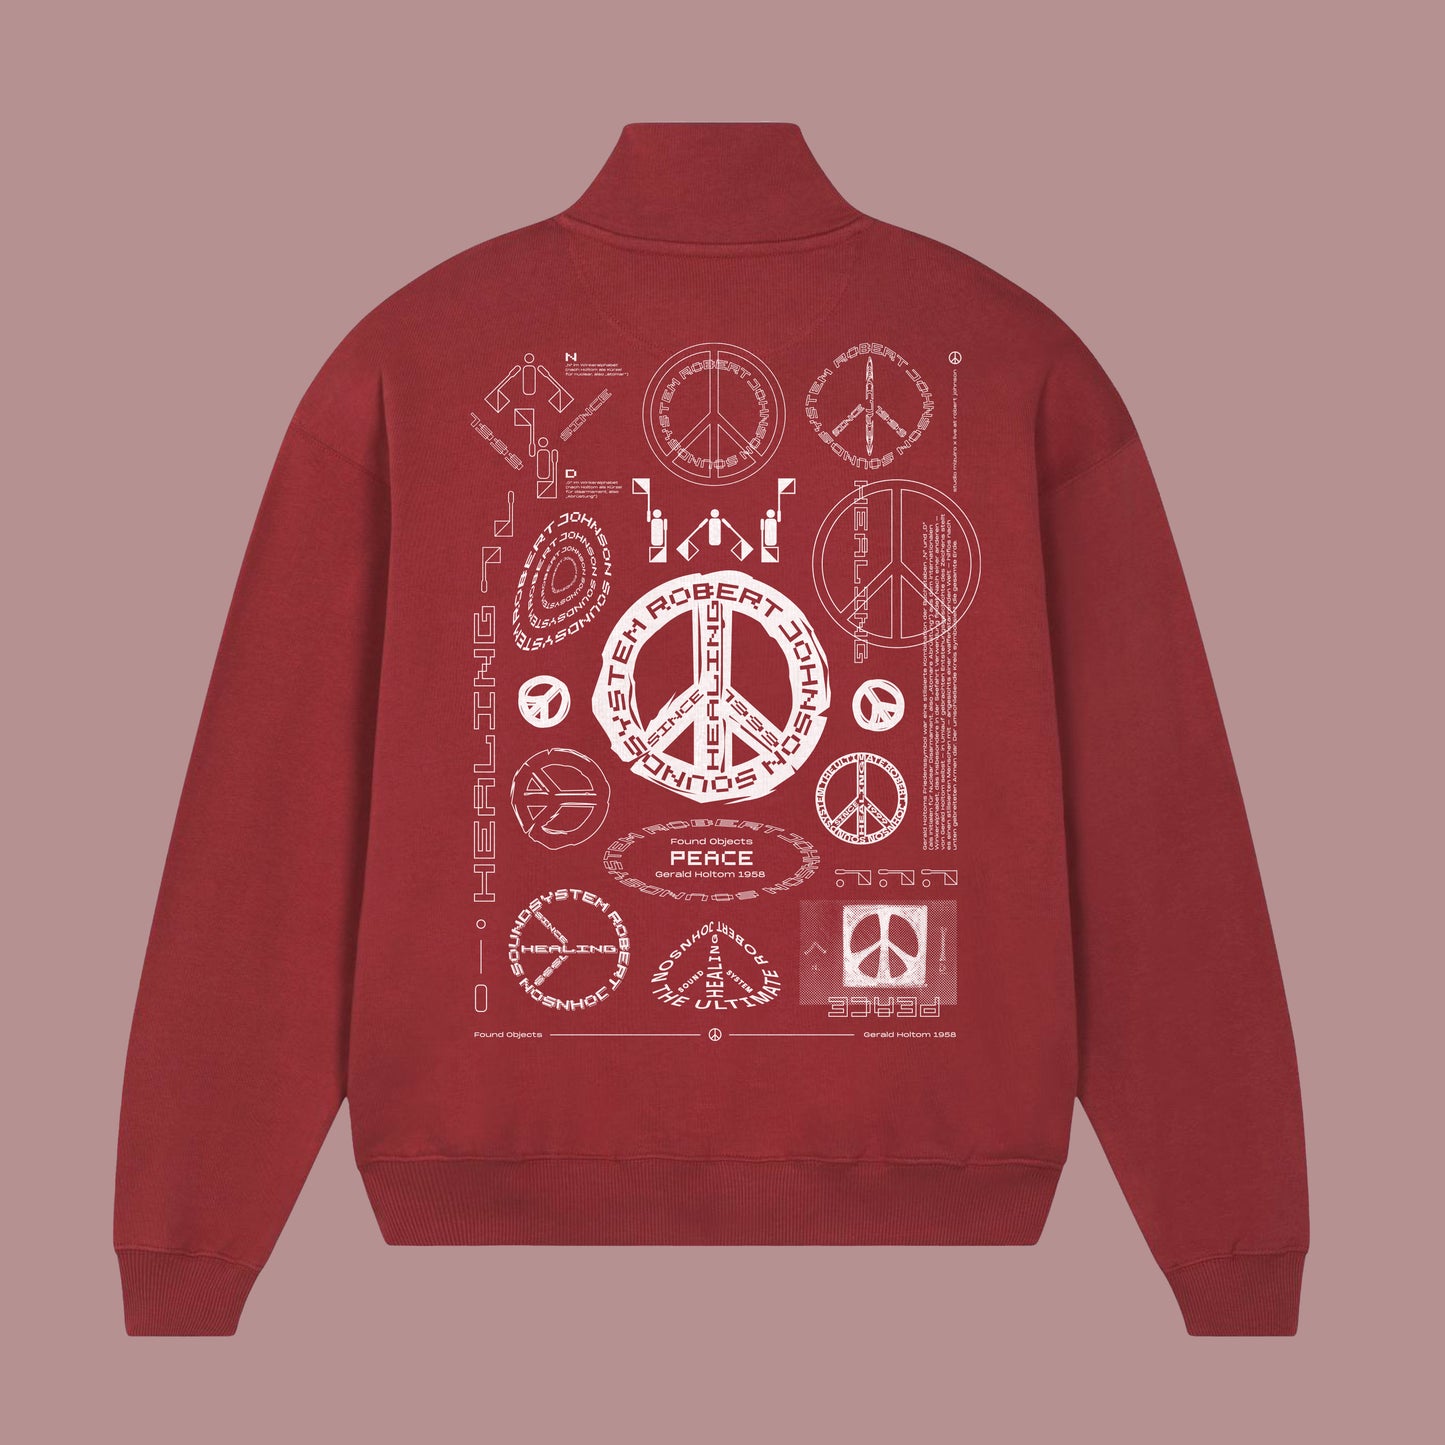 "Found Objects: Peace by Gerald Holtom!" - ZIP SWEATSHIRT - RED